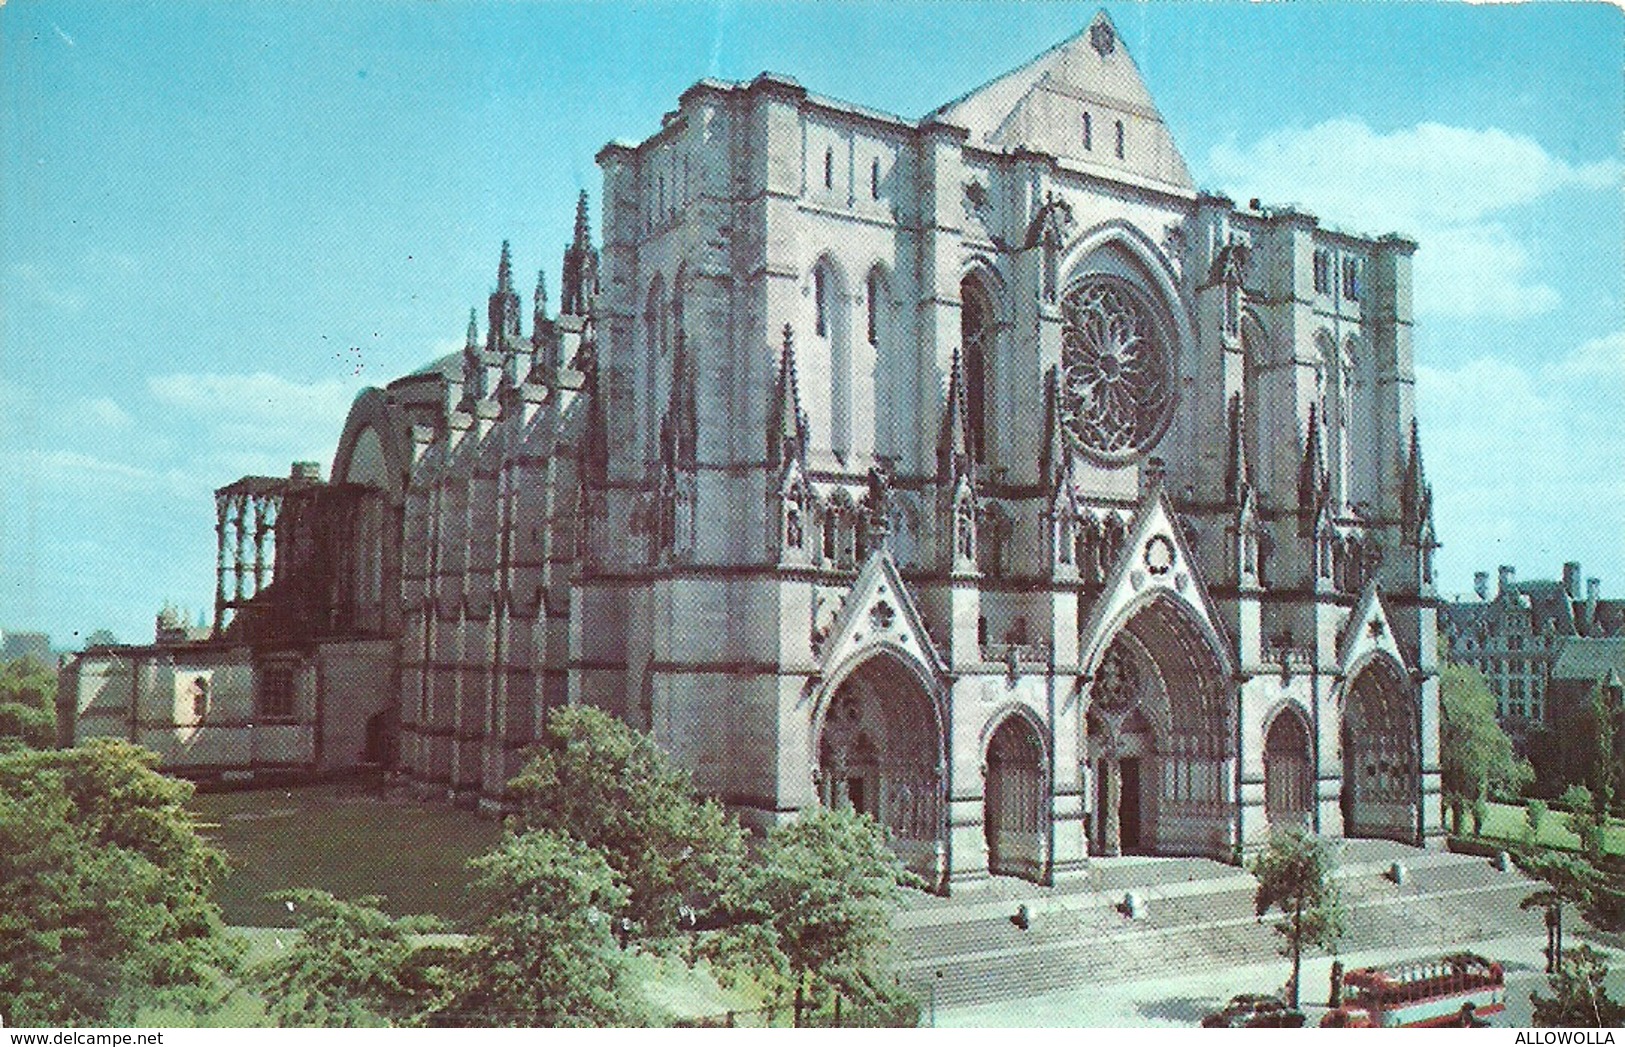 986 "THE CATHEDRAL OF ST. JOHN THE DIVINE- N.Y.  " CARTOLINA POSTALE ORIG.  NON SPED. - Churches